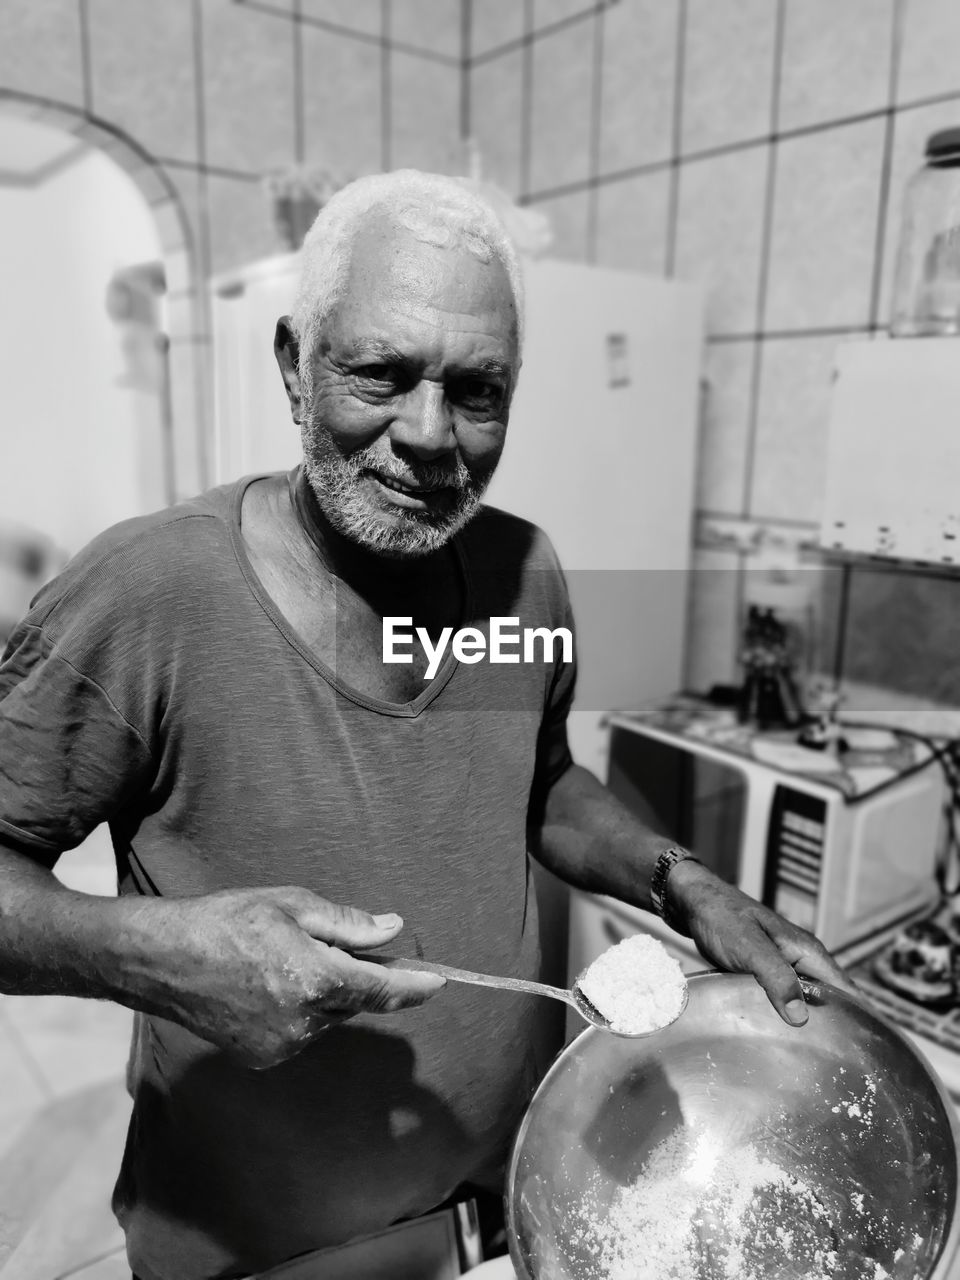 MAN HOLDING CAMERA IN KITCHEN AT HOME